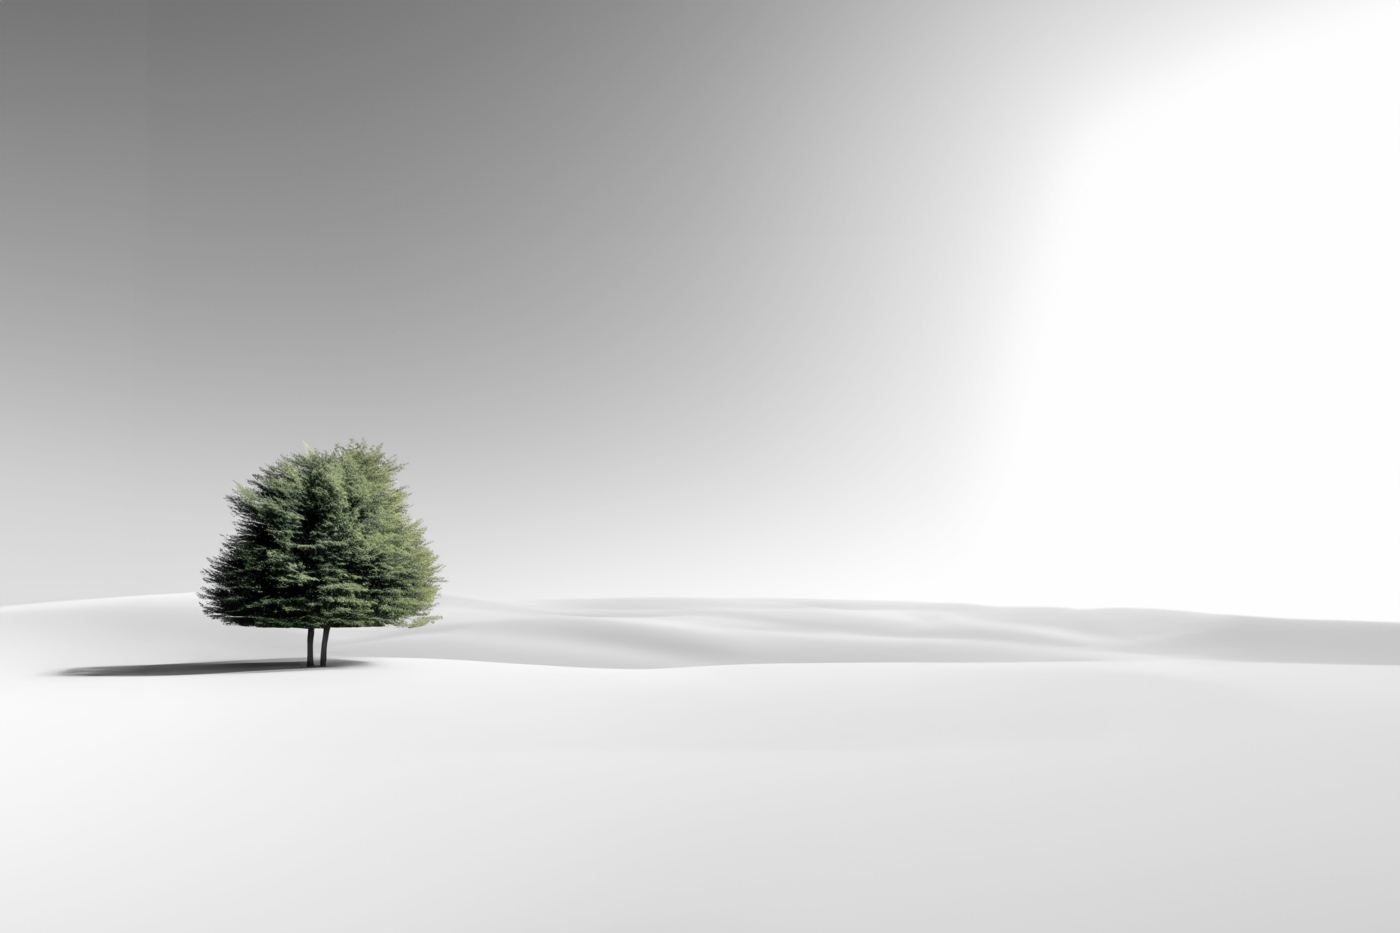 Two trees in minimalistic landscape